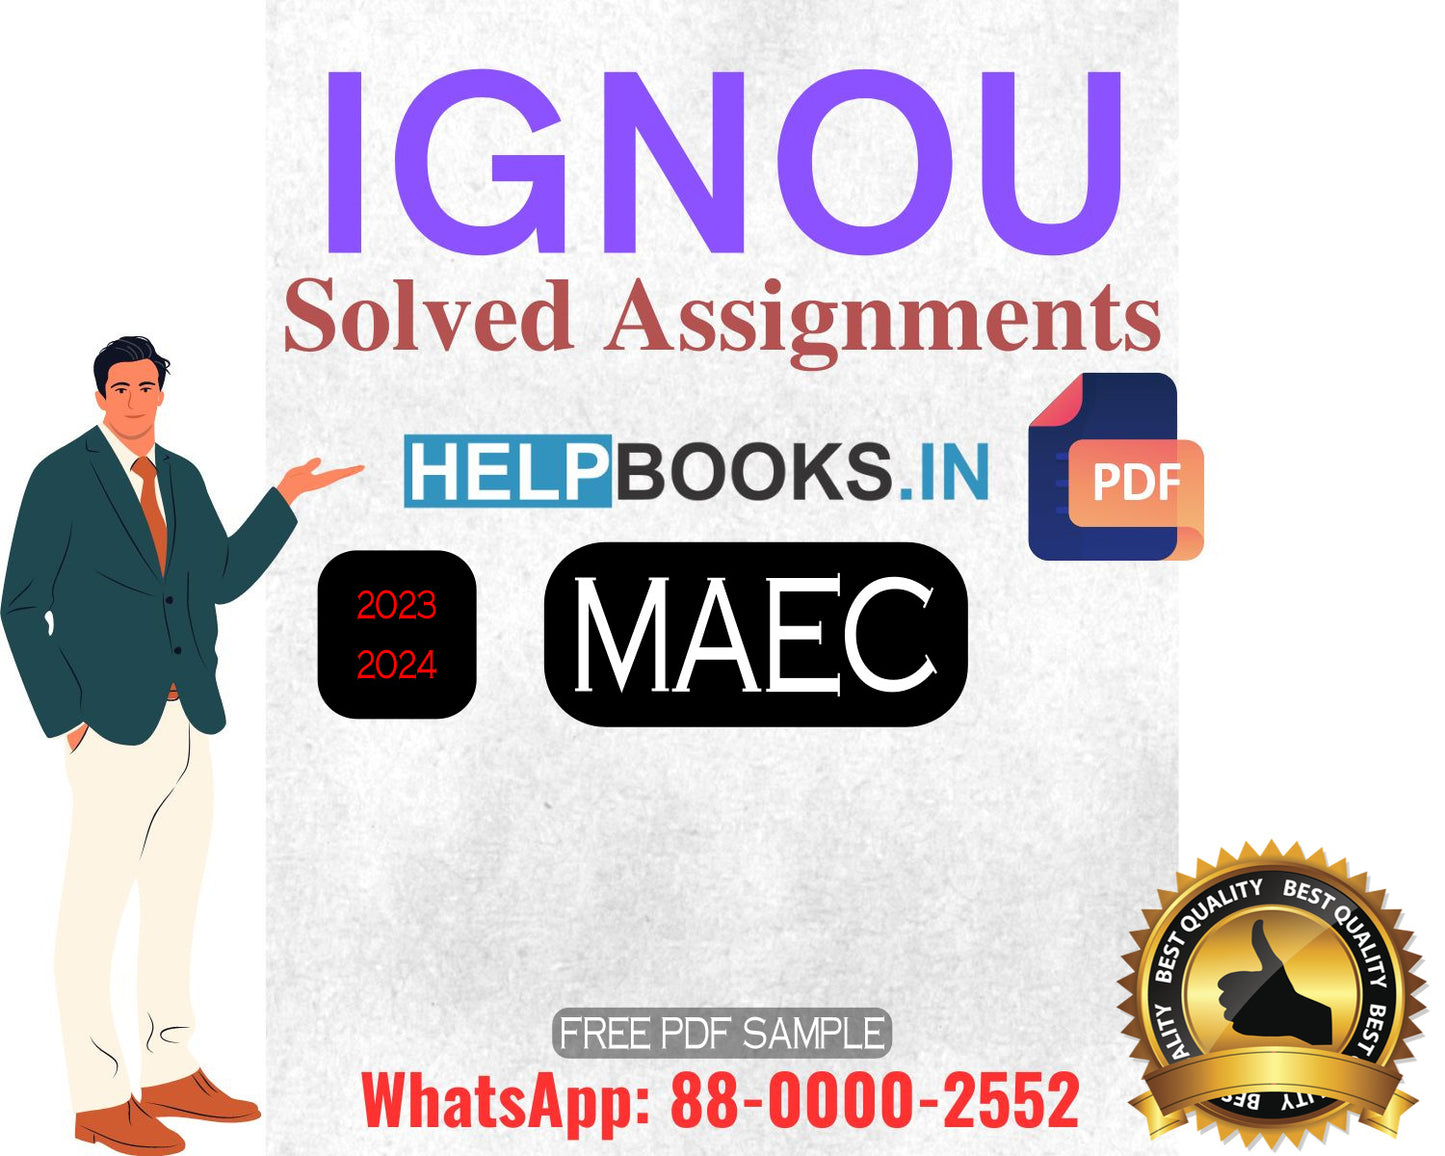 IGNOU Master's Degree Programme Latest IGNOU Solved Assignment 2023-24 : MAEC Master of Arts Economics Solved Assignments